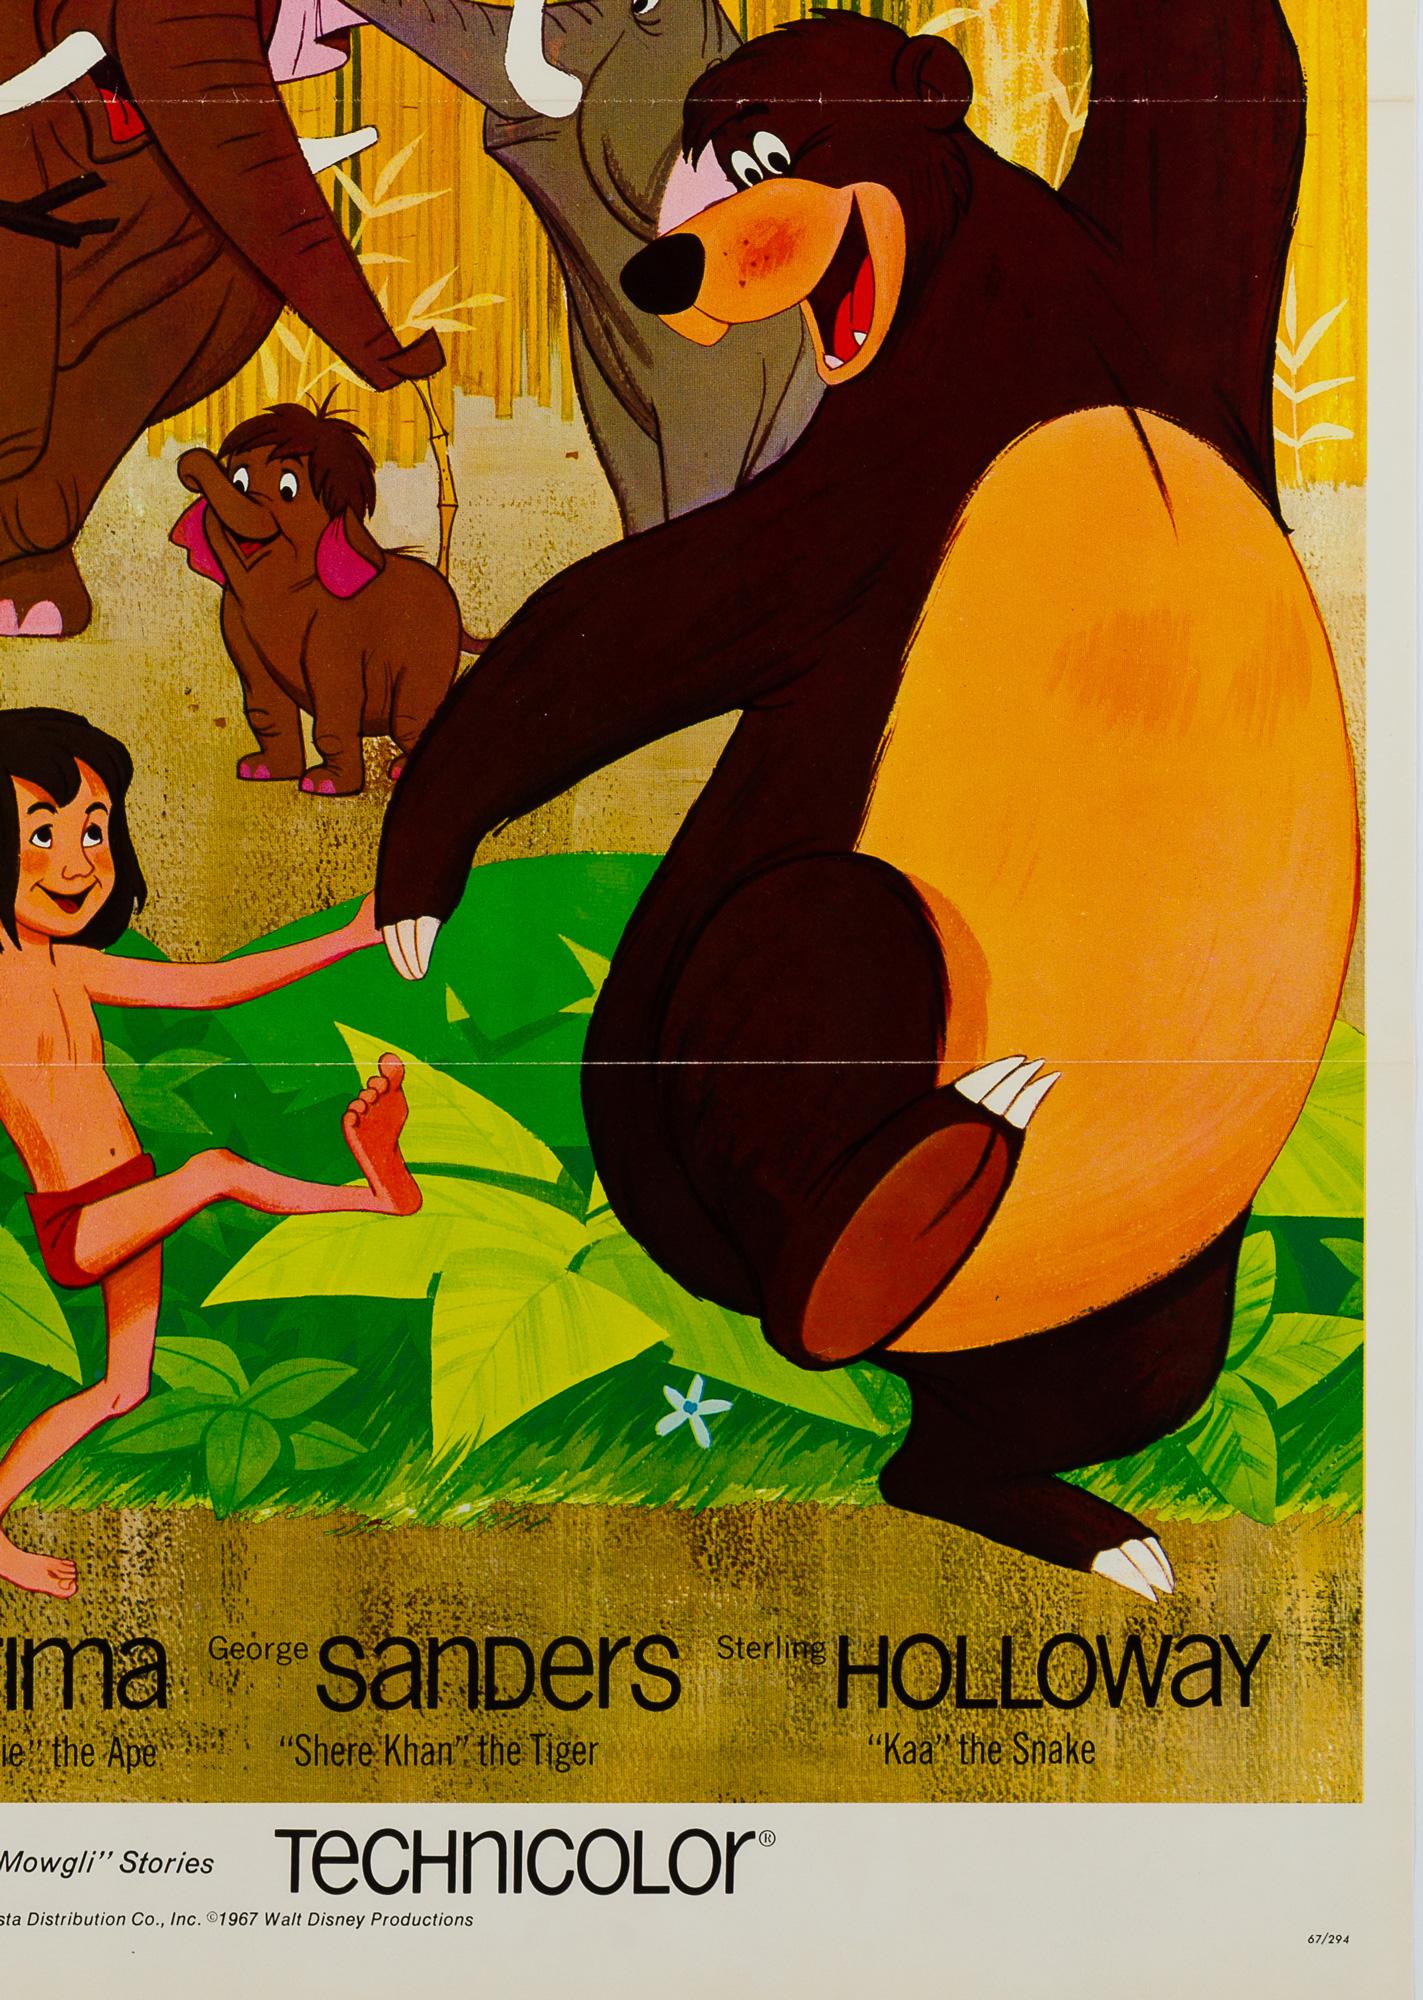 'The Jungle is Jumpin'

One of our favourite vintage Disney US film posters. Wonderfully rich colors and great styling. A must for any man, or girl, cub!

This movie poster is in near mint condition tri-folded (as issued) measuring 27 x 41